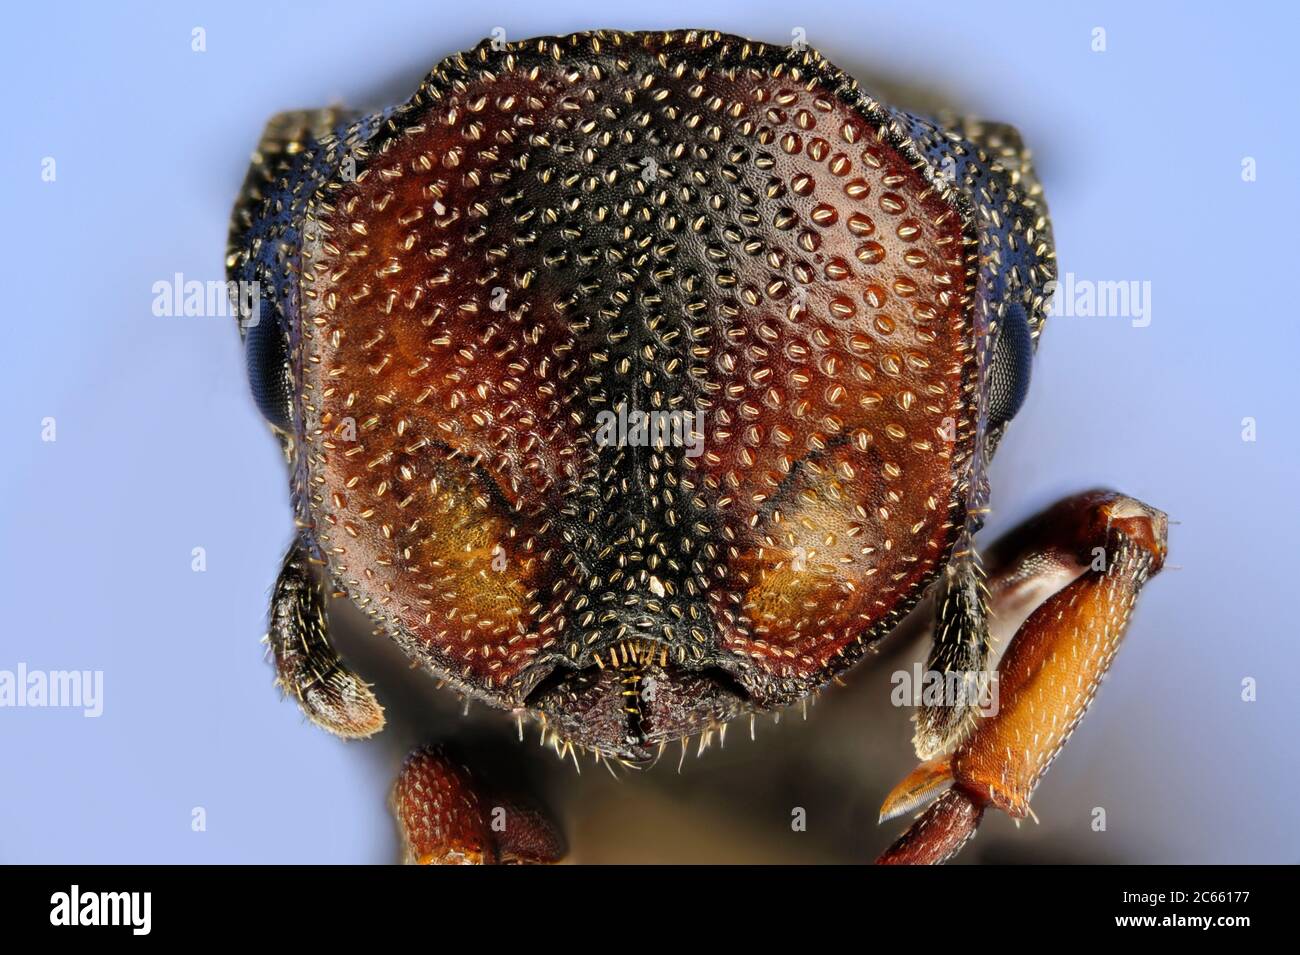 [Digital focus stacking] Ant portrait, Cephalotes angustus, Ants of the genus Cephalotes are restricted to the New World and all species live arboreal. They nest inside dead or living stems of plants. Pollen seems to be a major component of their diet. Recently S. Yanoviak and coworkers found that they are excellent gliders. Picture was taken in cooperation with the 'Staatl. Museum für Naturkunde Karlsruhe'. Stock Photo